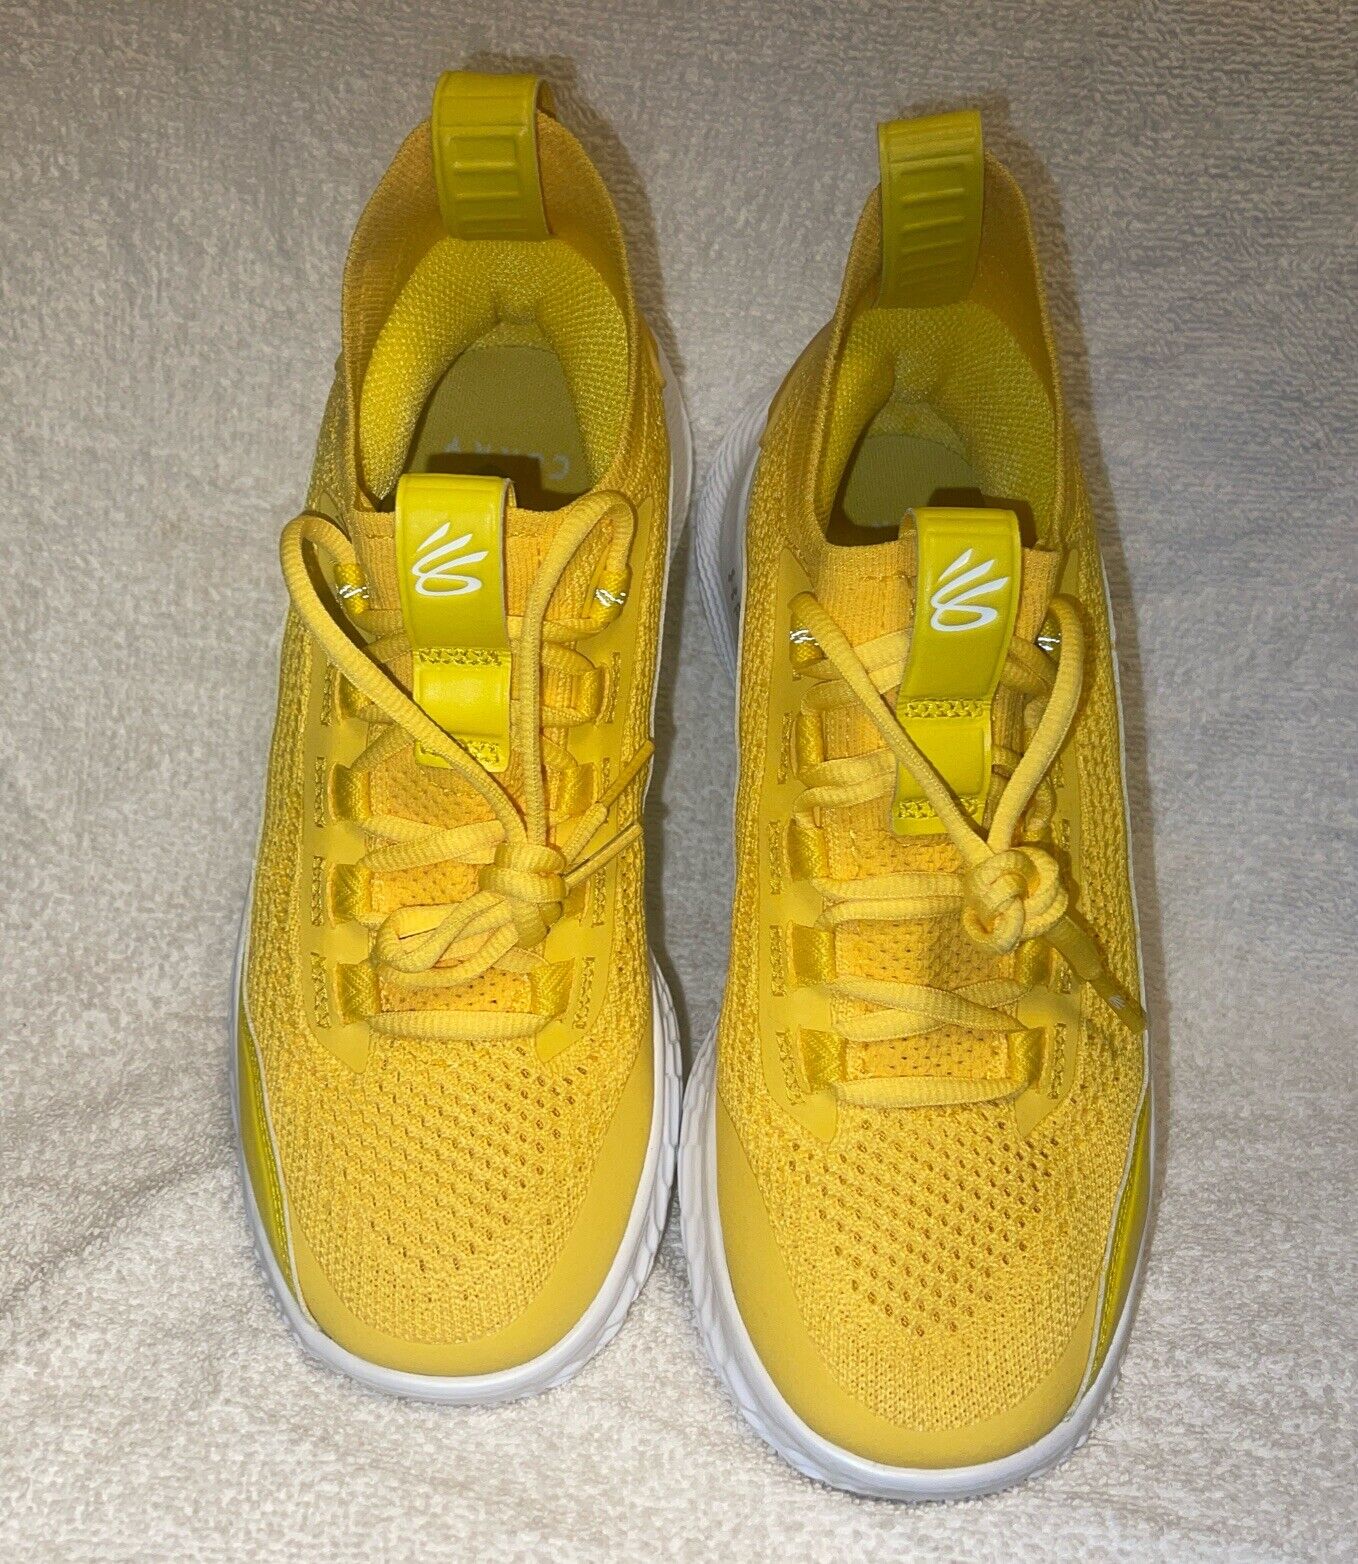 Magnificent Under Armour Curry ‘Smooth Butter Flow’ 8 Yellow Basketball Shoes Boys Size 7Y on eBay